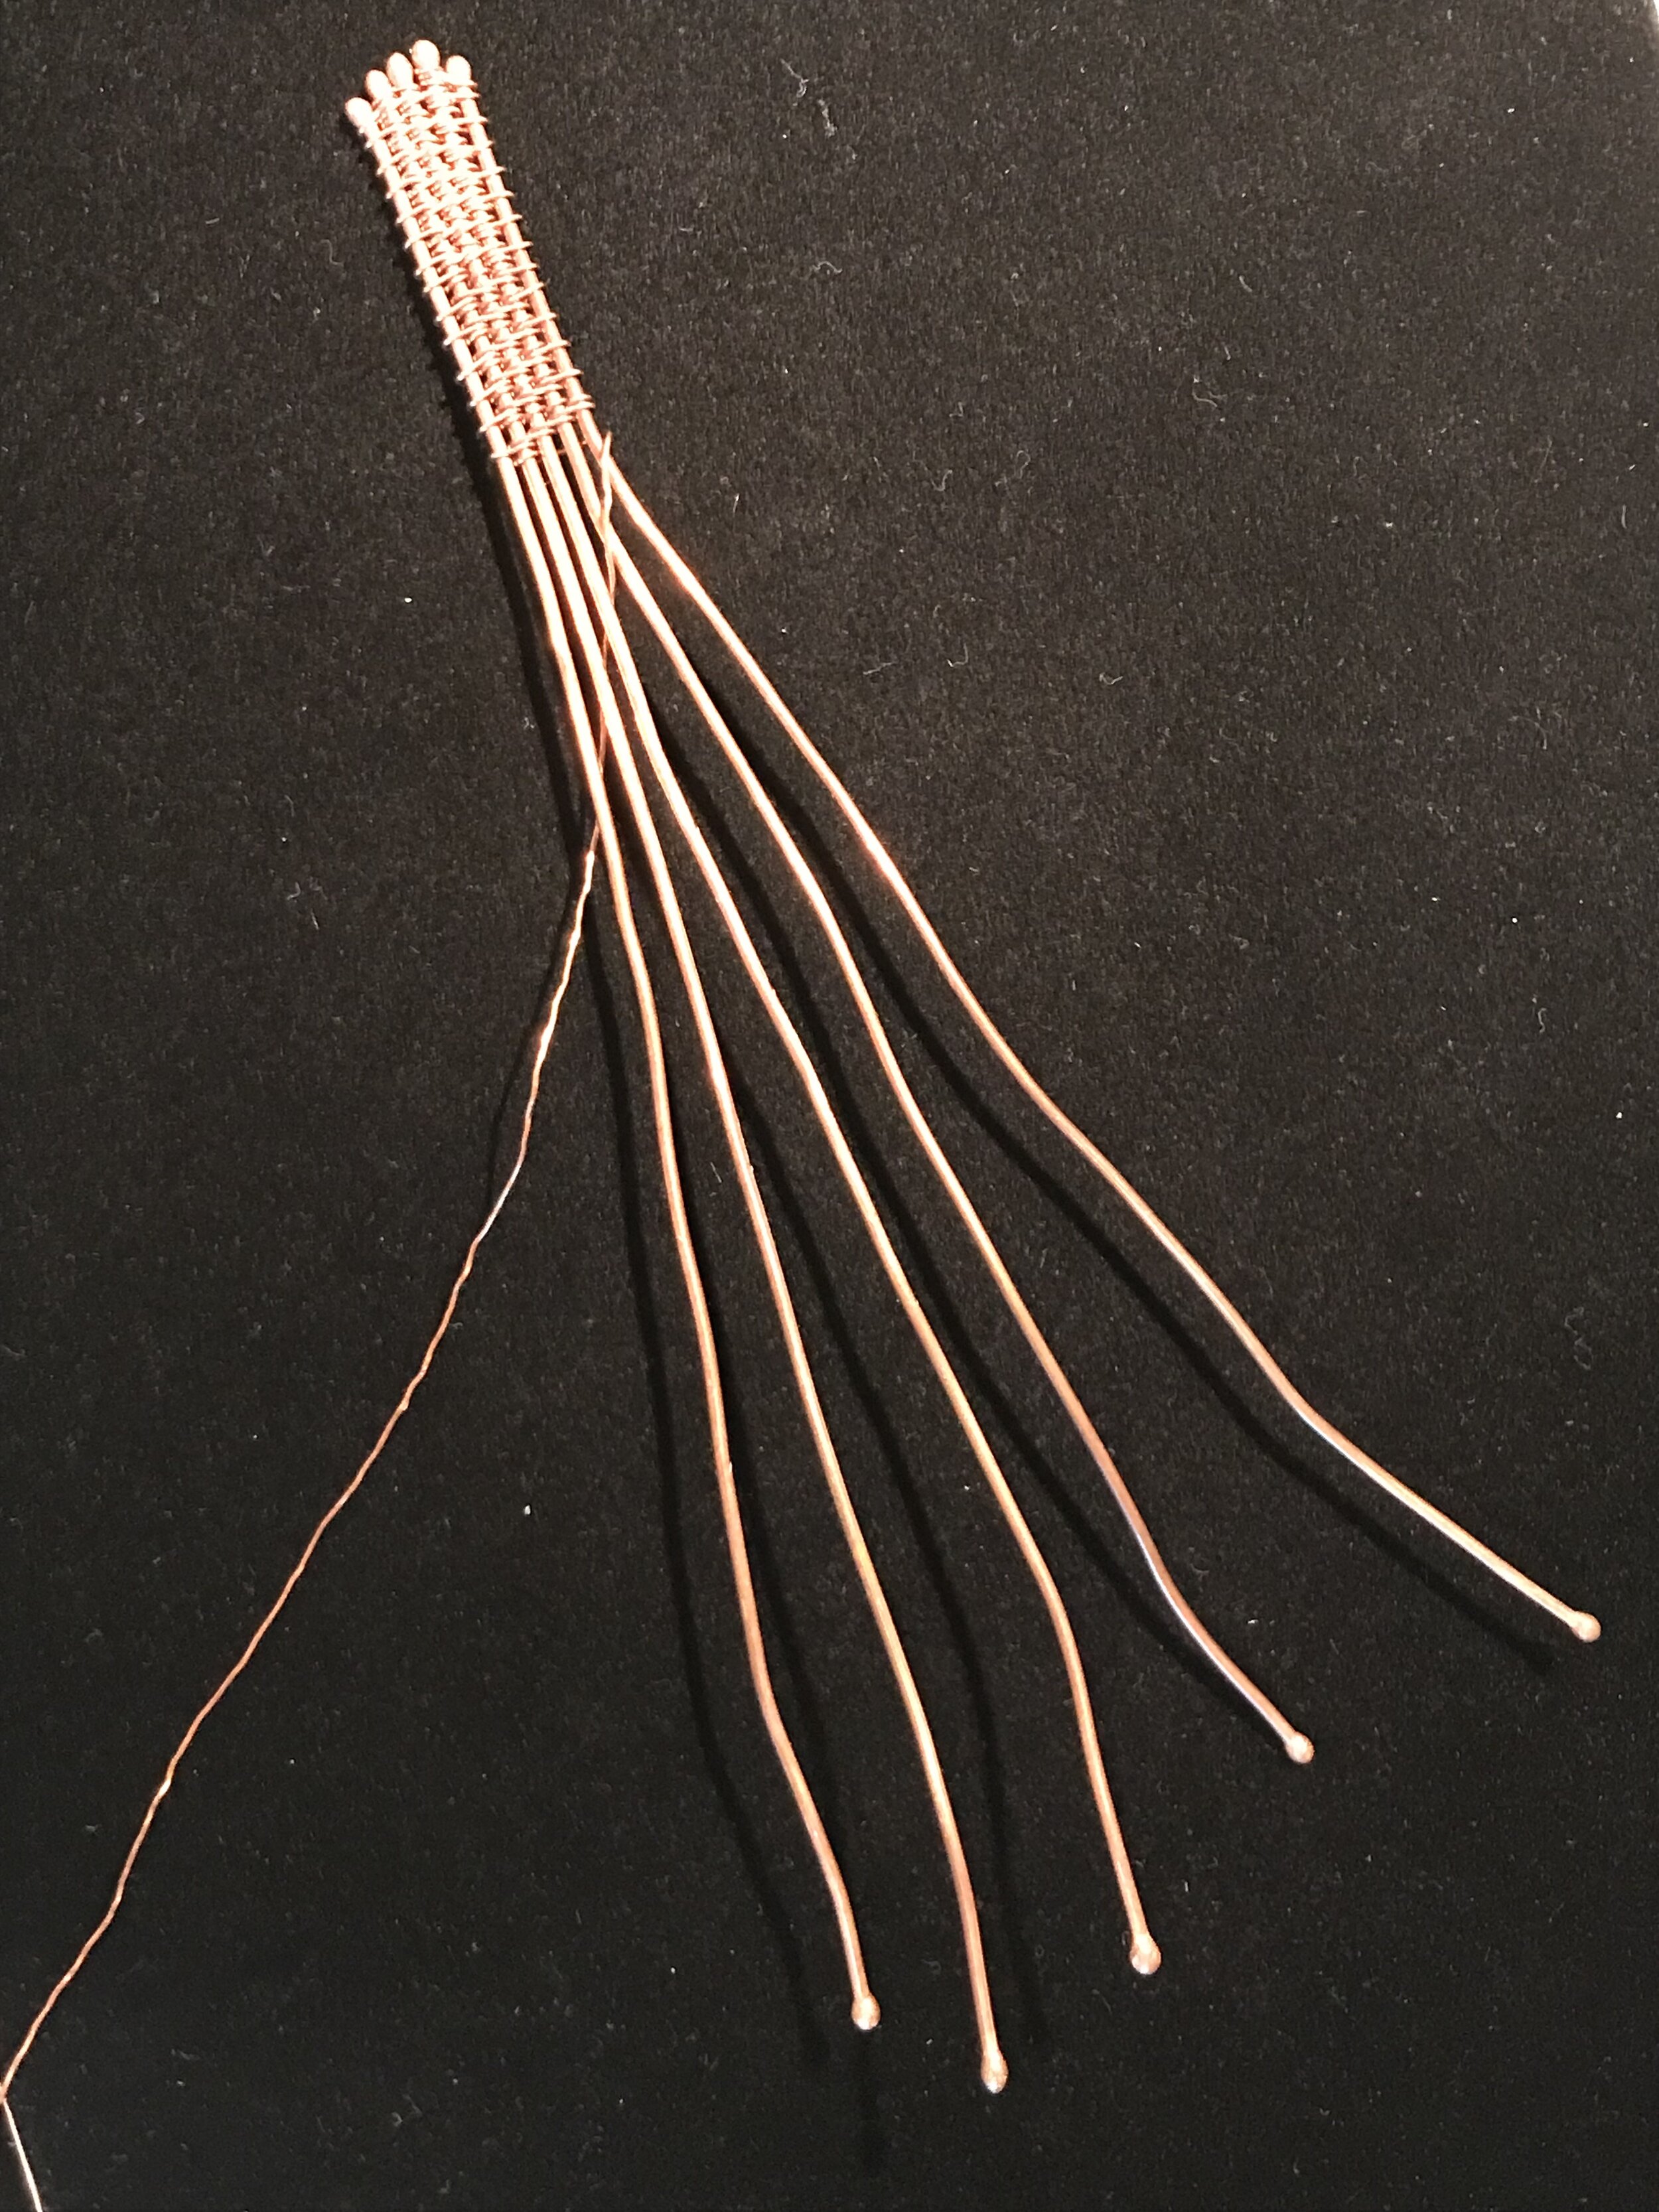 Fine wire is used to weave 